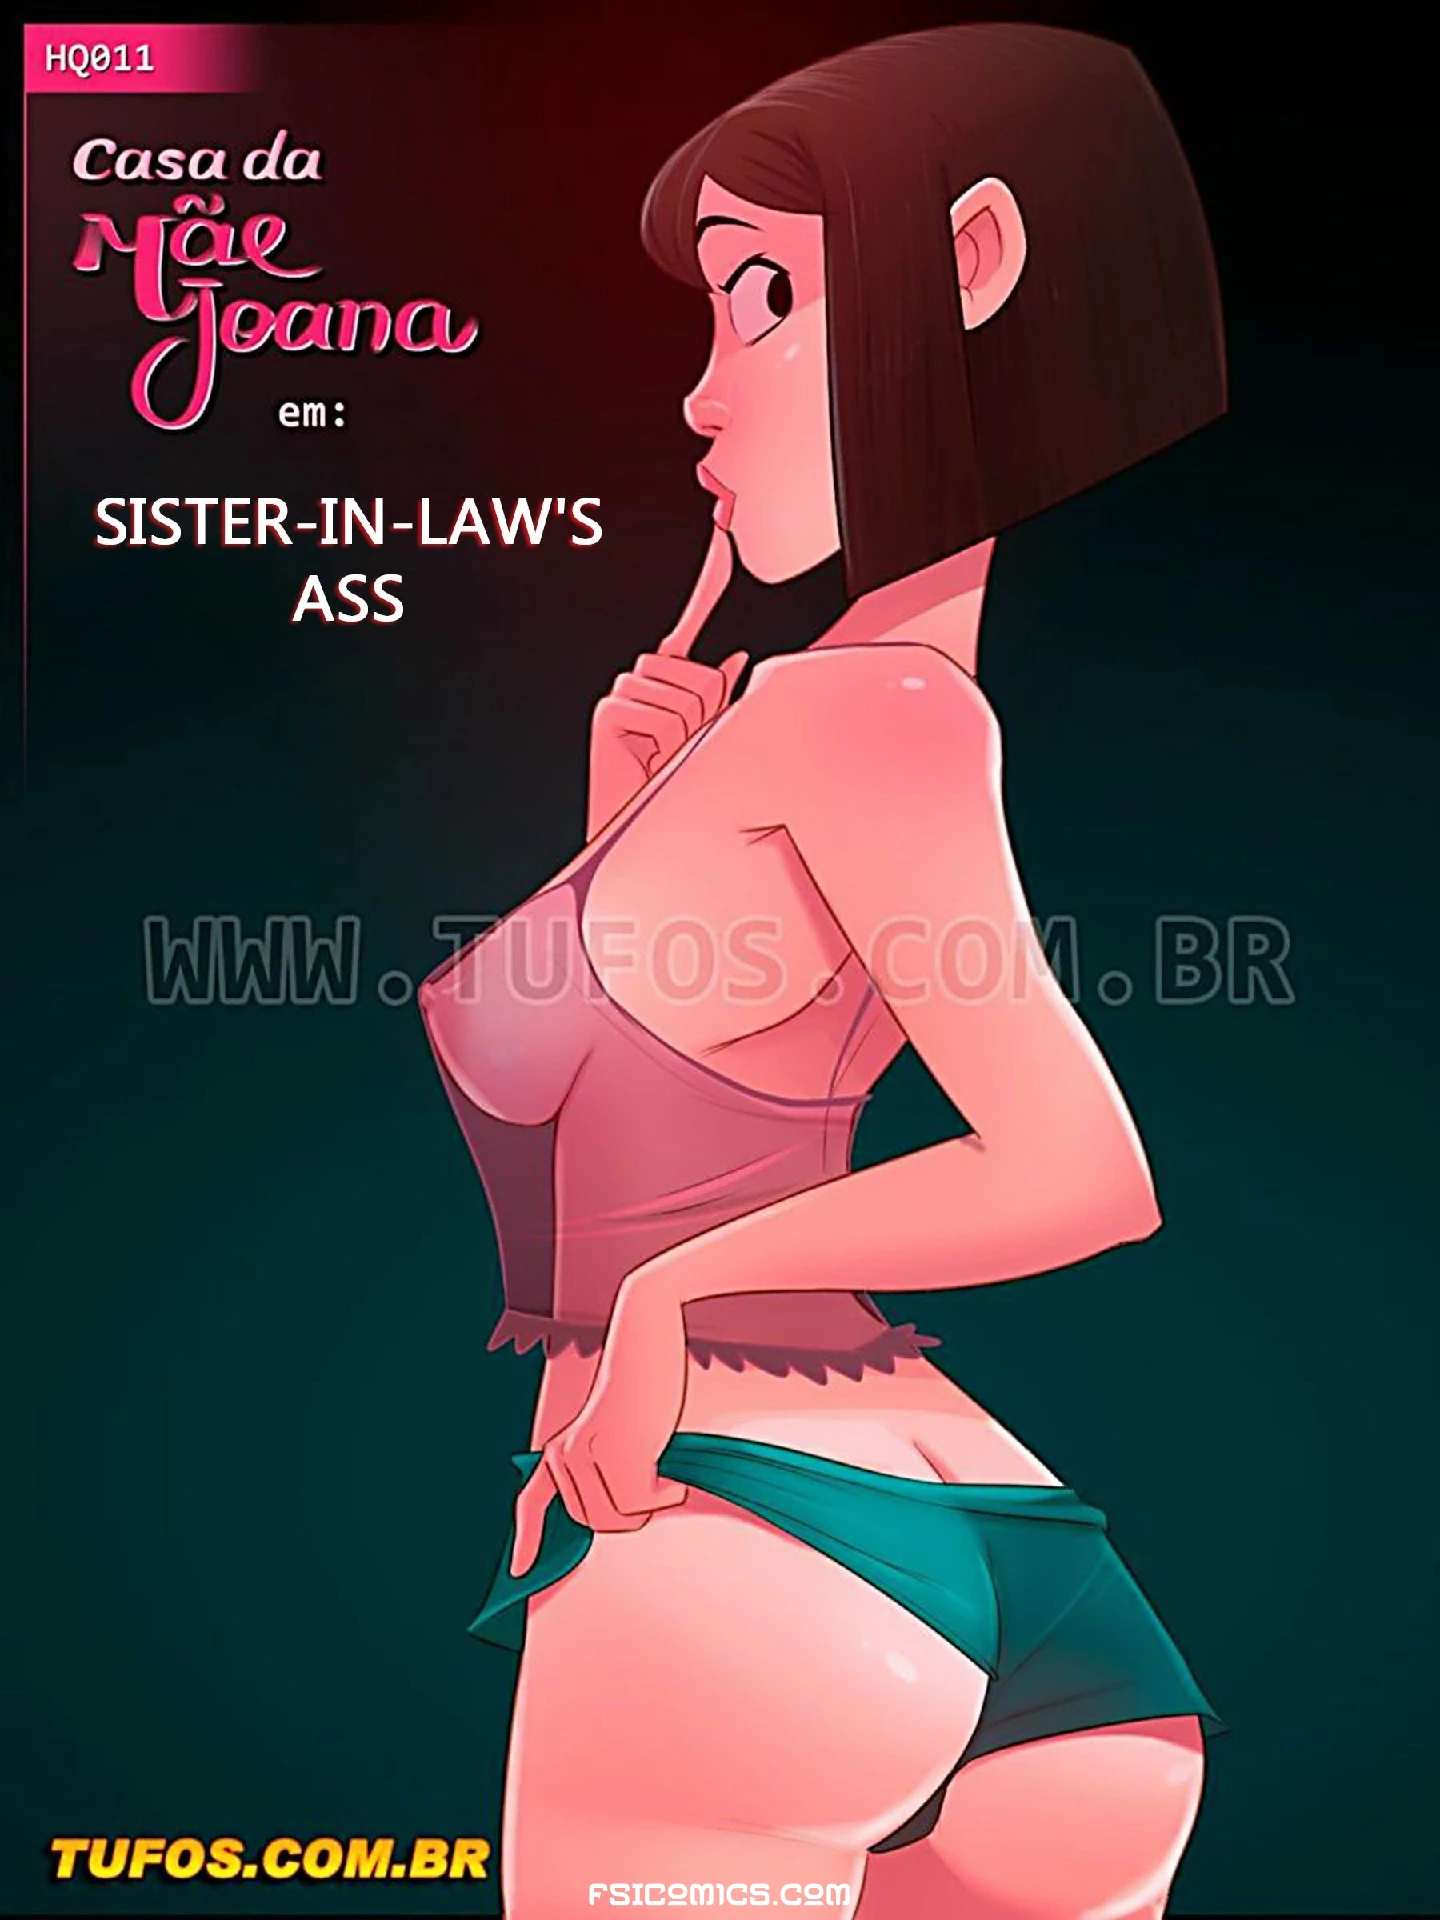 House Of Mom Joana Chapter 11 – Sister-In-Law's Ass – WC TF - 15 - FSIComics